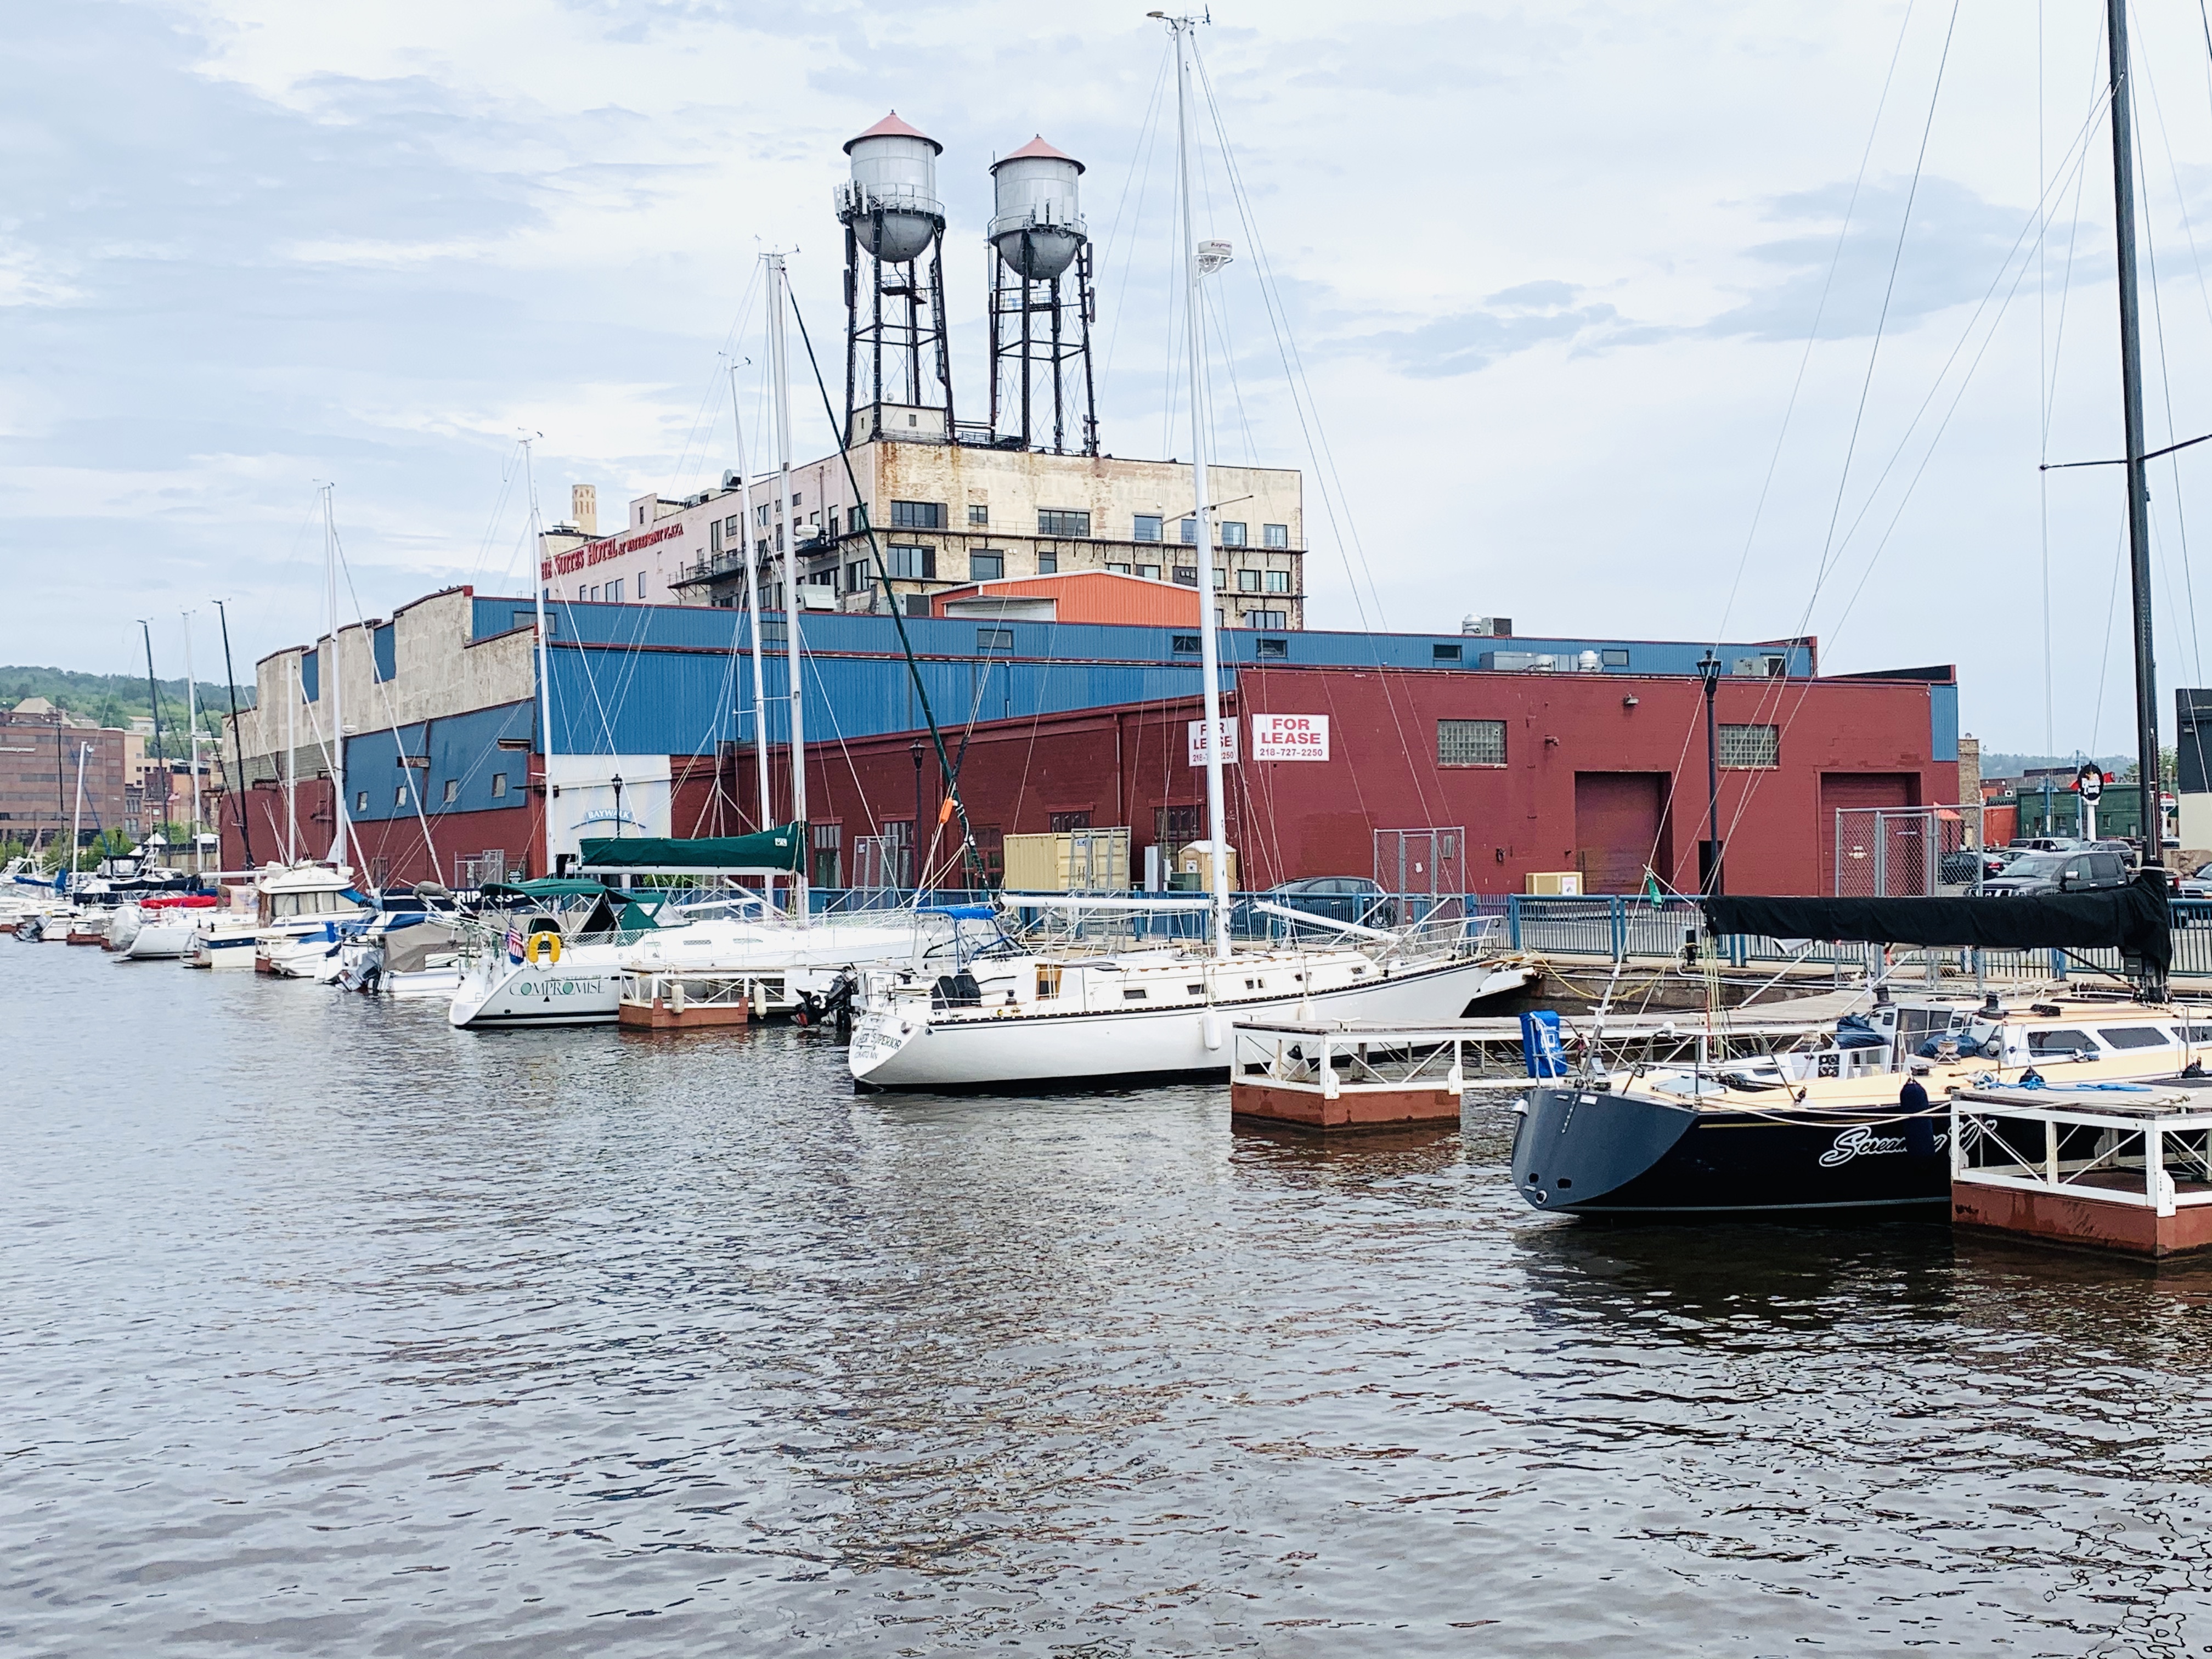 Discover the best Free Things to do in Duluth, MN from Top U.S. family travel blog Travel With A Plan!  Duluth Family Vacation | Free Things to do in Duluth | Duluth Itinerary | Best Things to do in Duluth With Kids #familytravel #freethingstodoinduluth #thingstodoinDuluthMN 